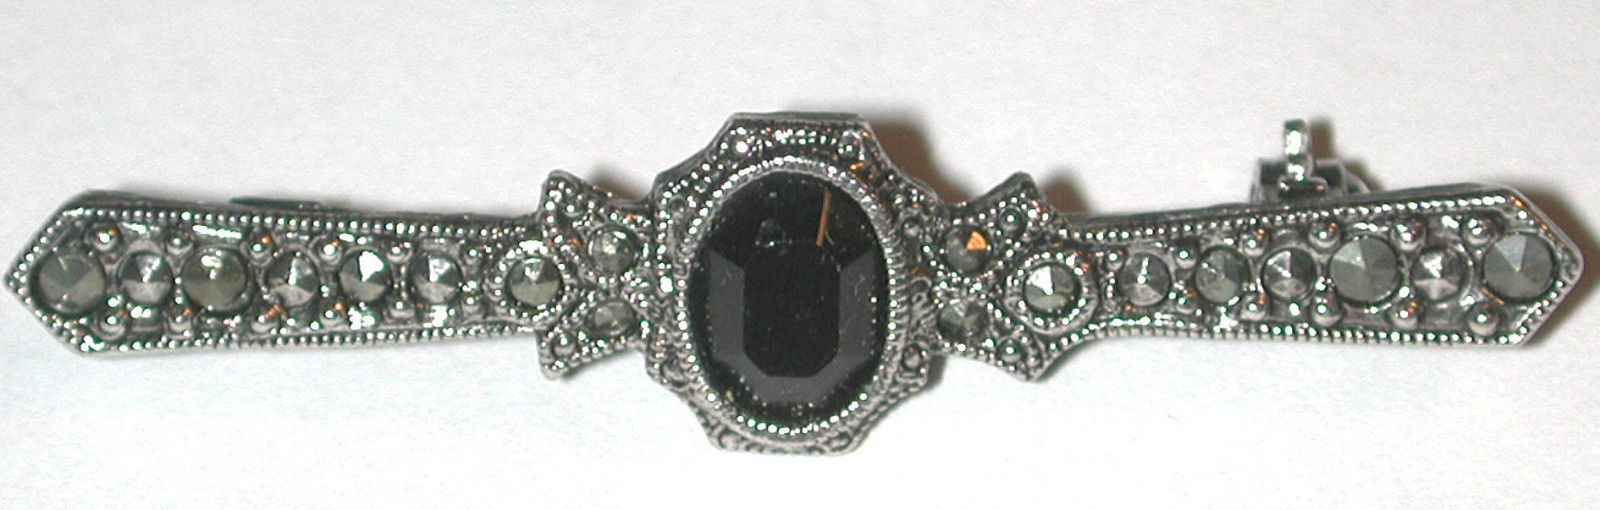 Signed 1928 Bar Pin Brooch Black stone Silver-tone used - $10.00